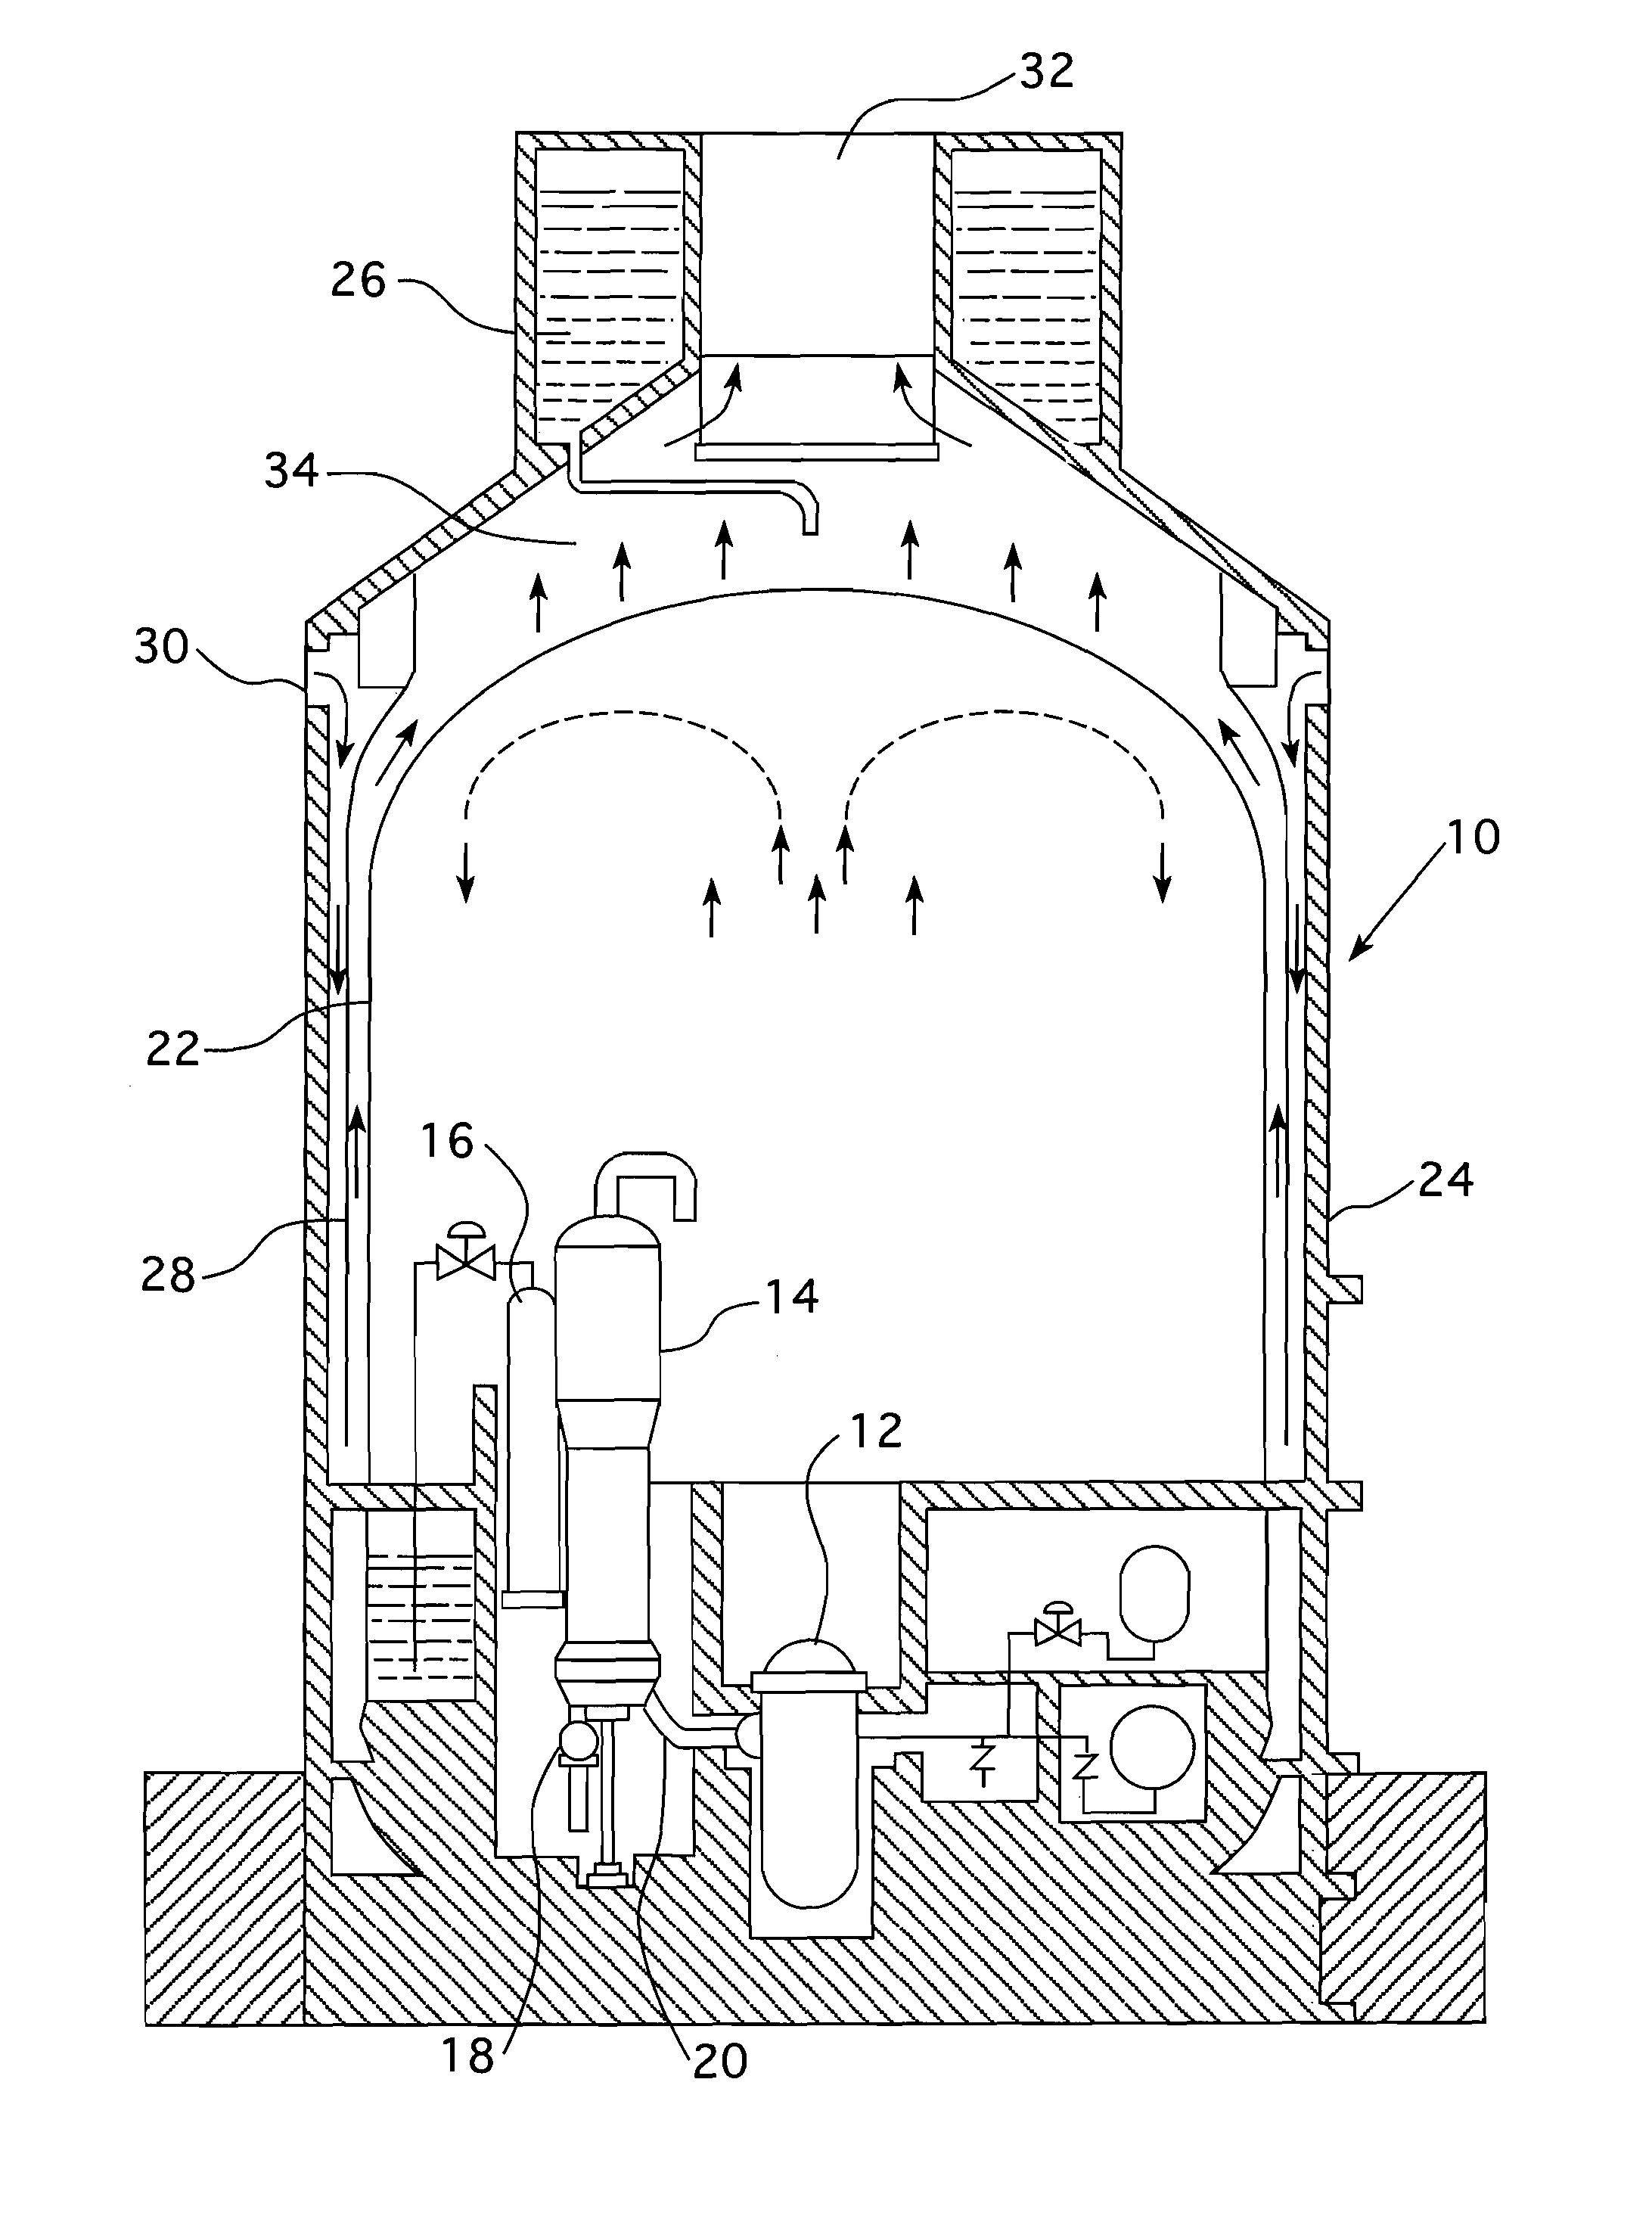 Passive containment air cooling for nuclear power plants